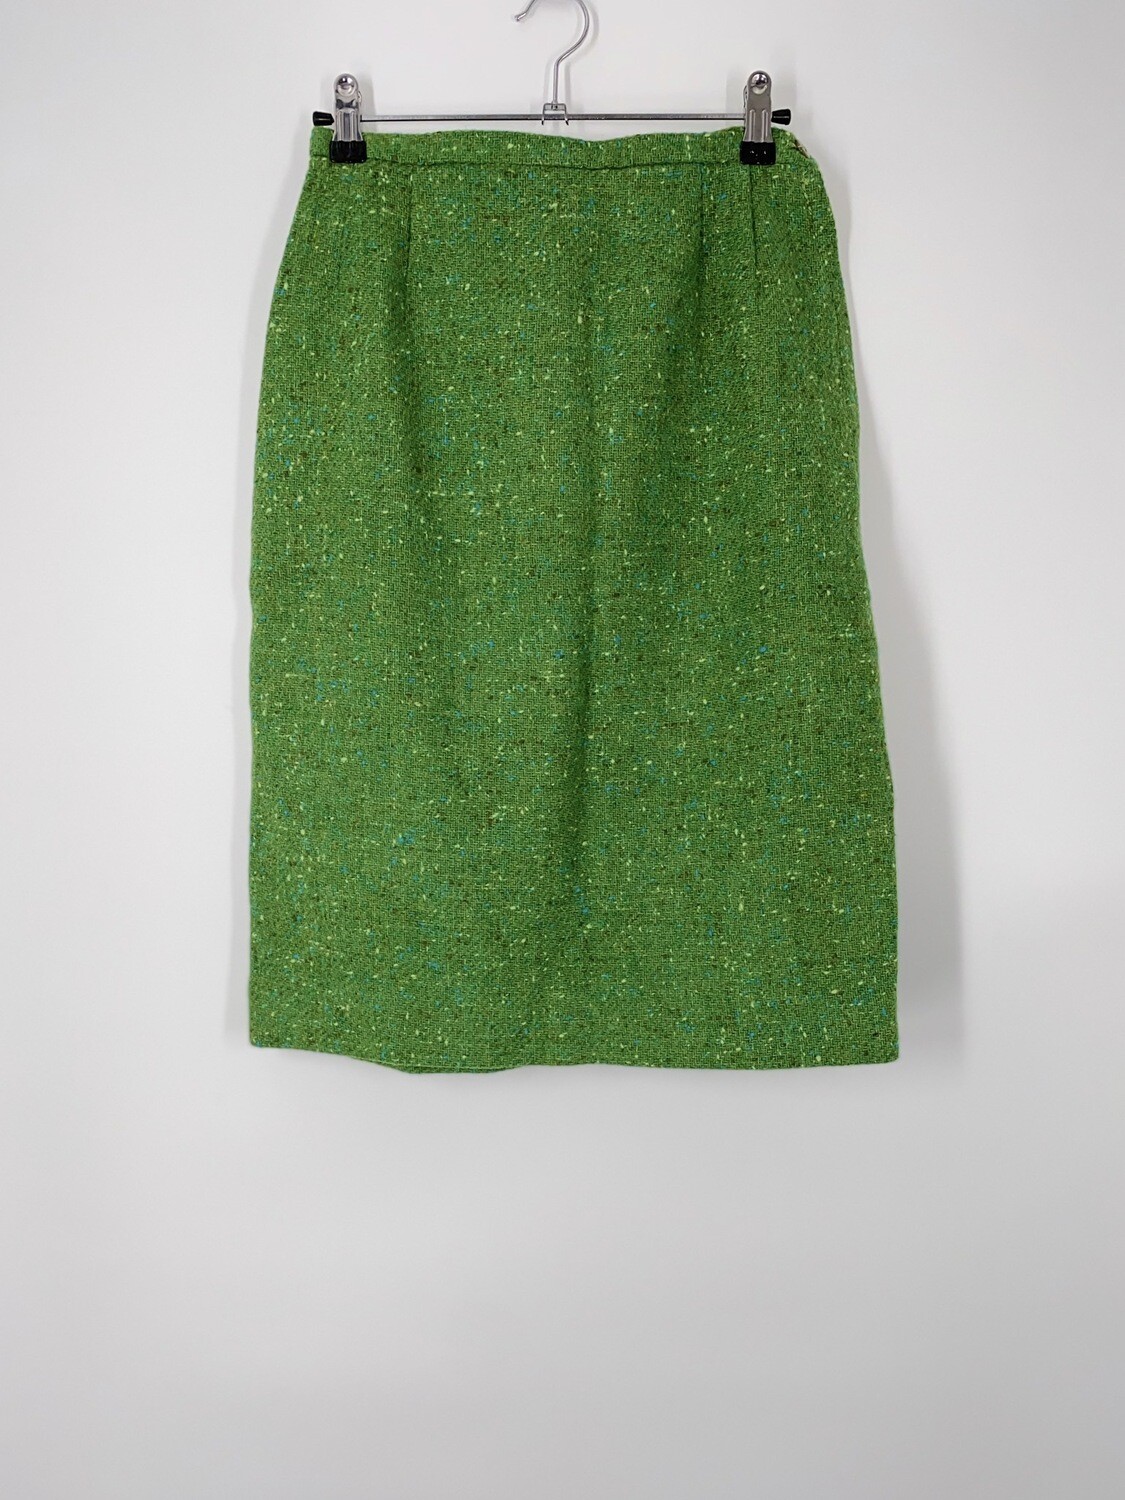 Green Speckled Wool Skirt Size M